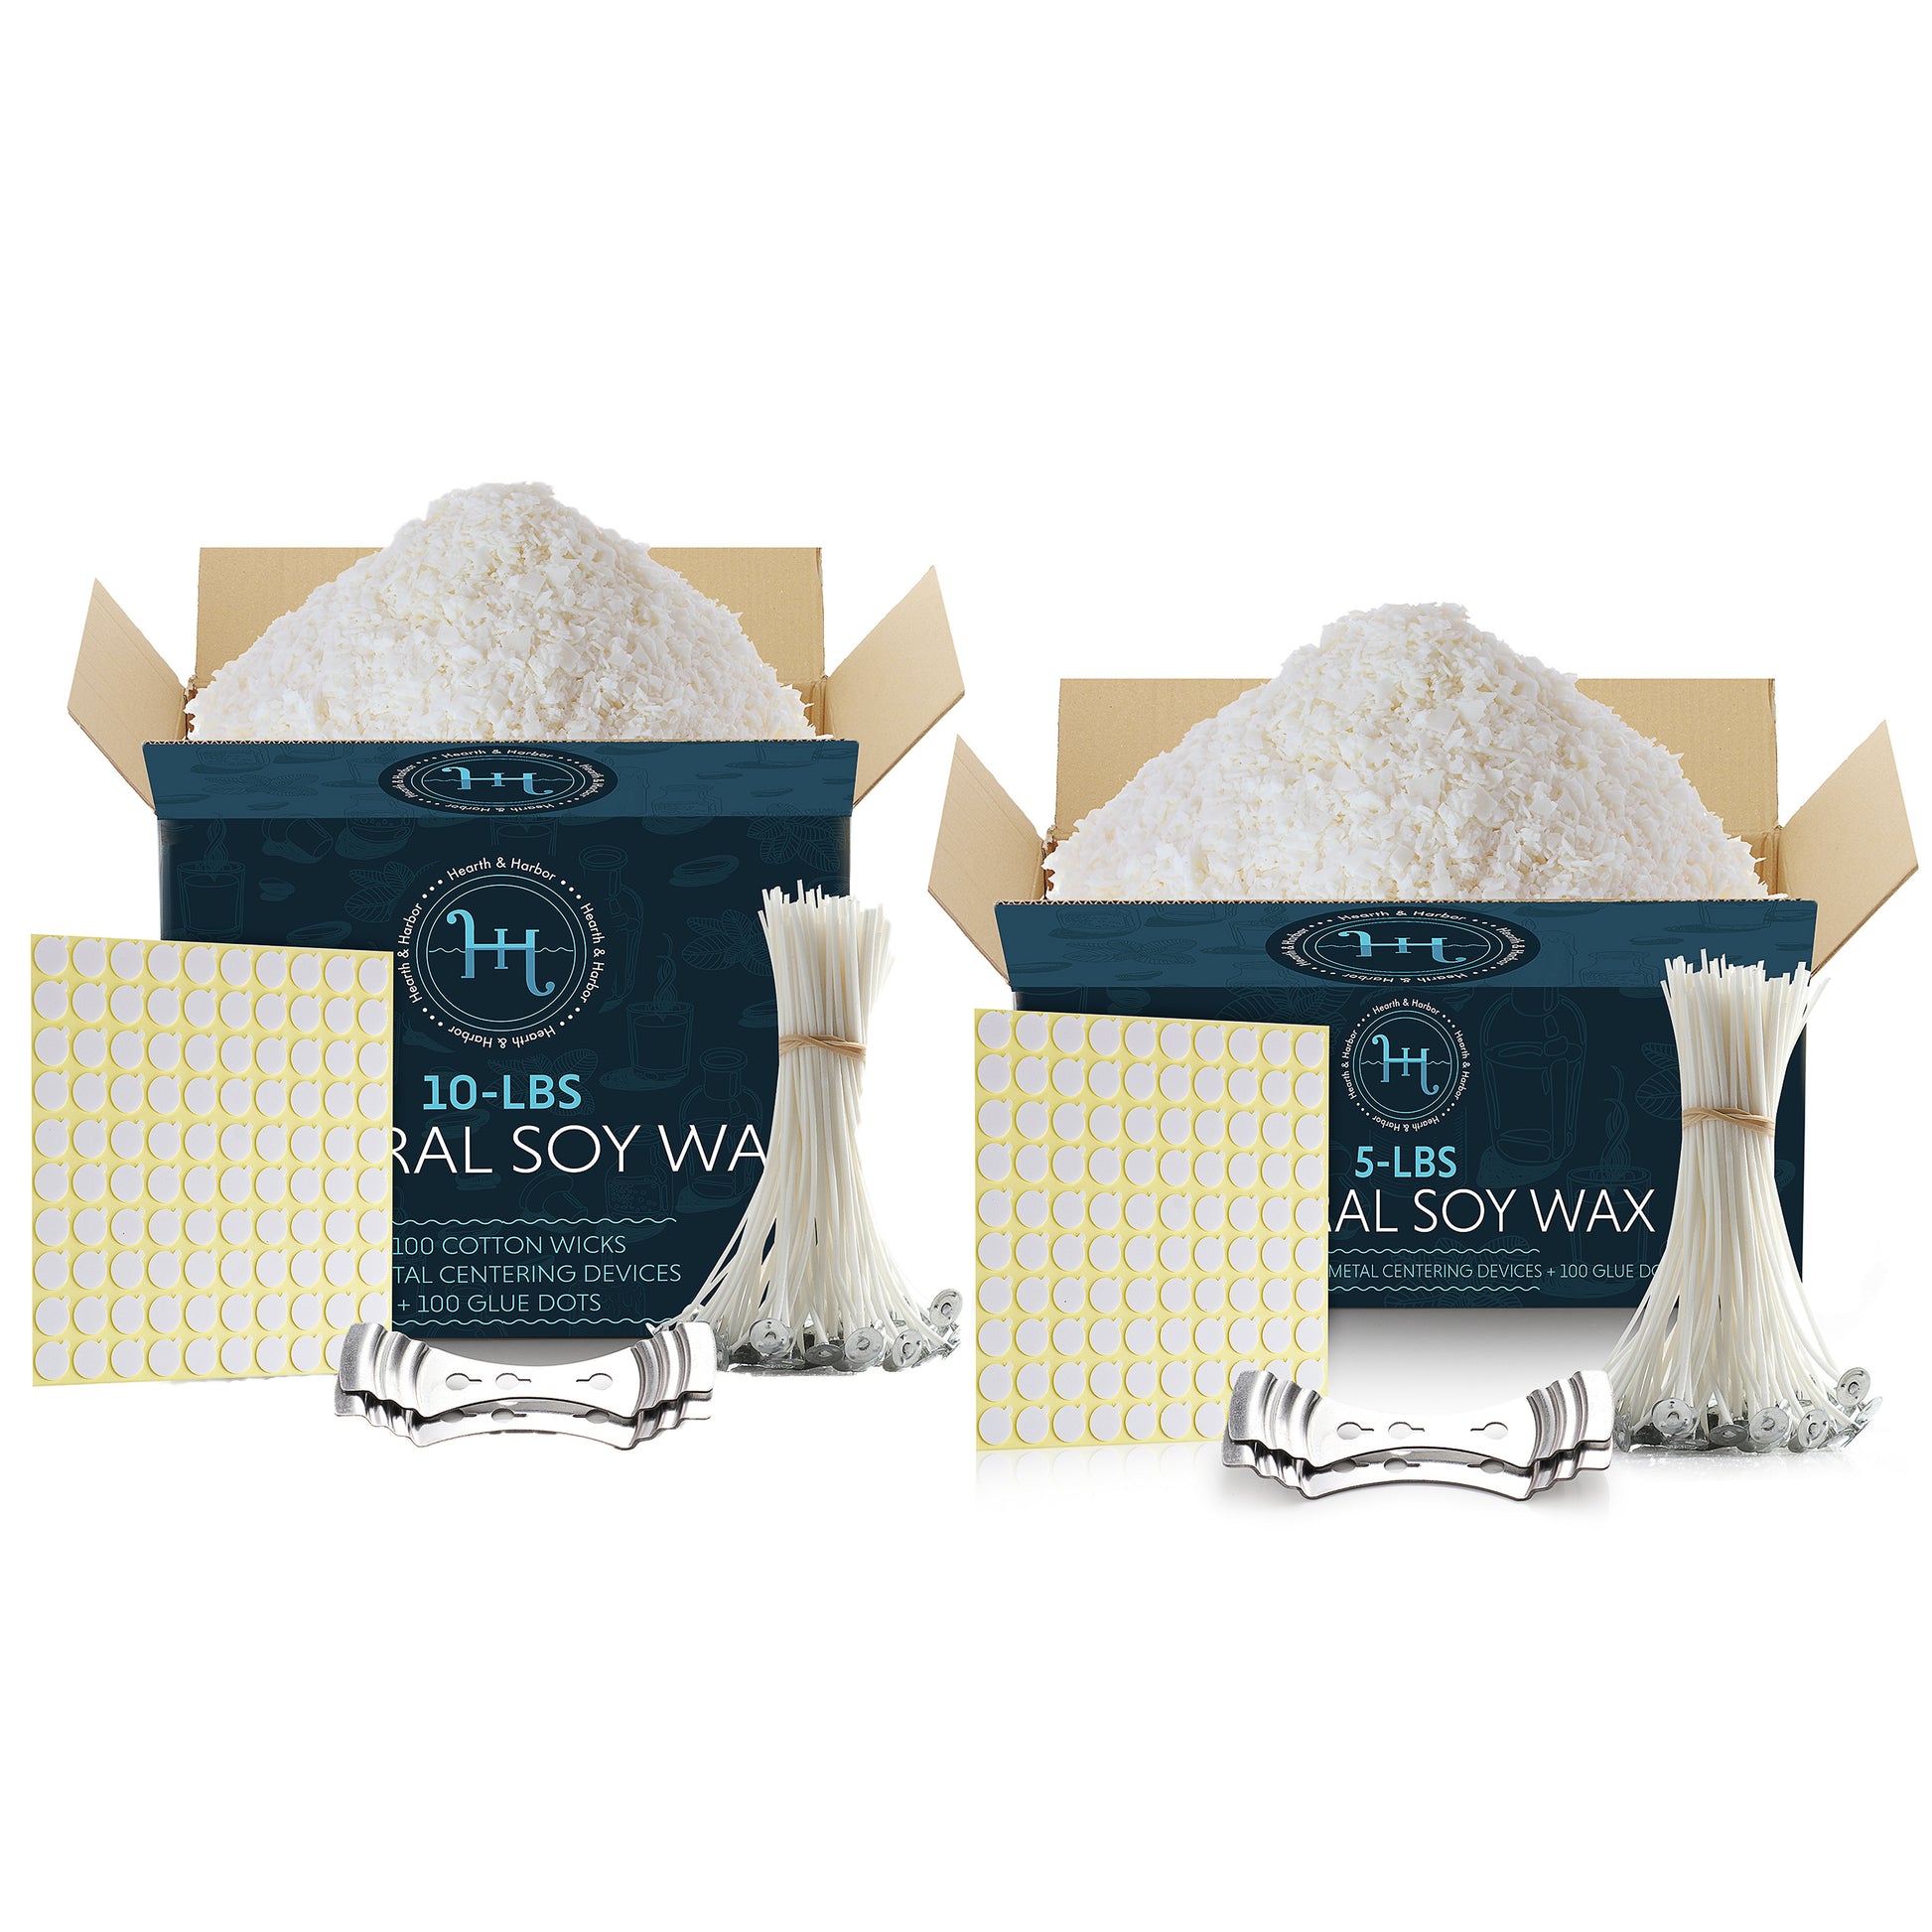 Hearth & Harbor DIY Candle Making Supplies, 10lb Soy Wax with Value Pack Accessories, White, Size: 11.00 inch x 8.30 inch x 8.00 inch